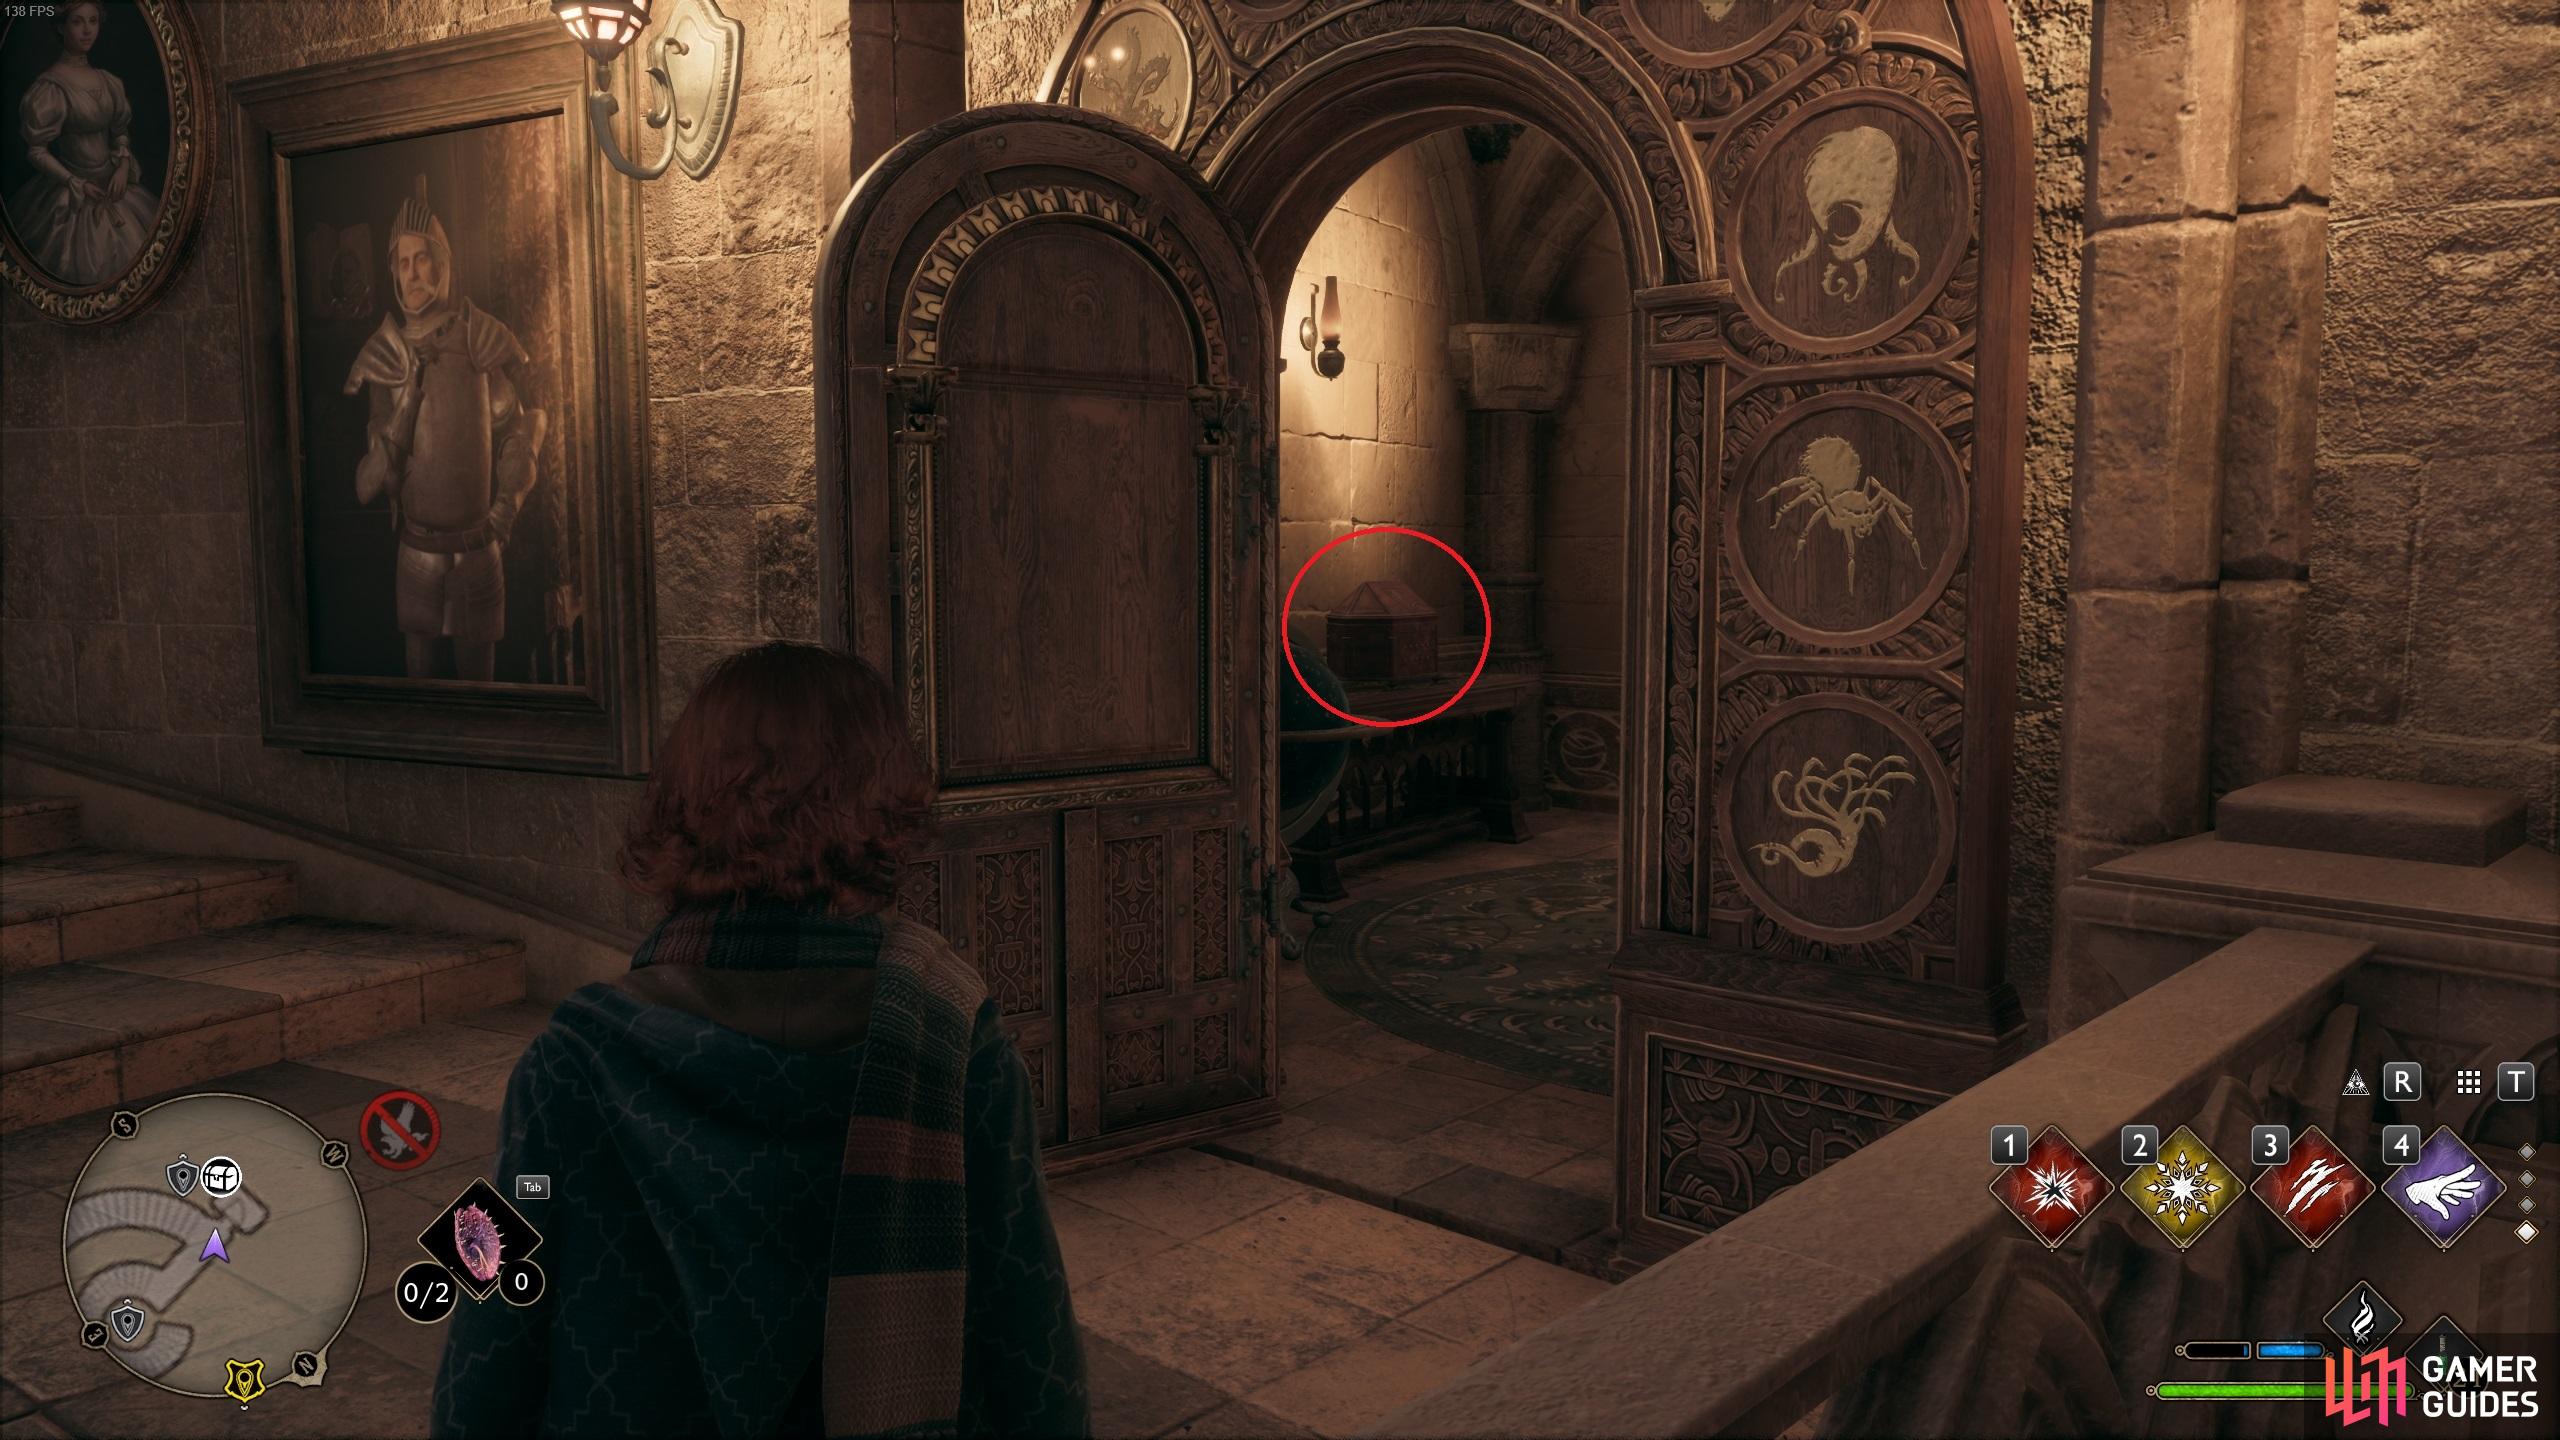 You'll find the Collection Chest in the room behind the door.